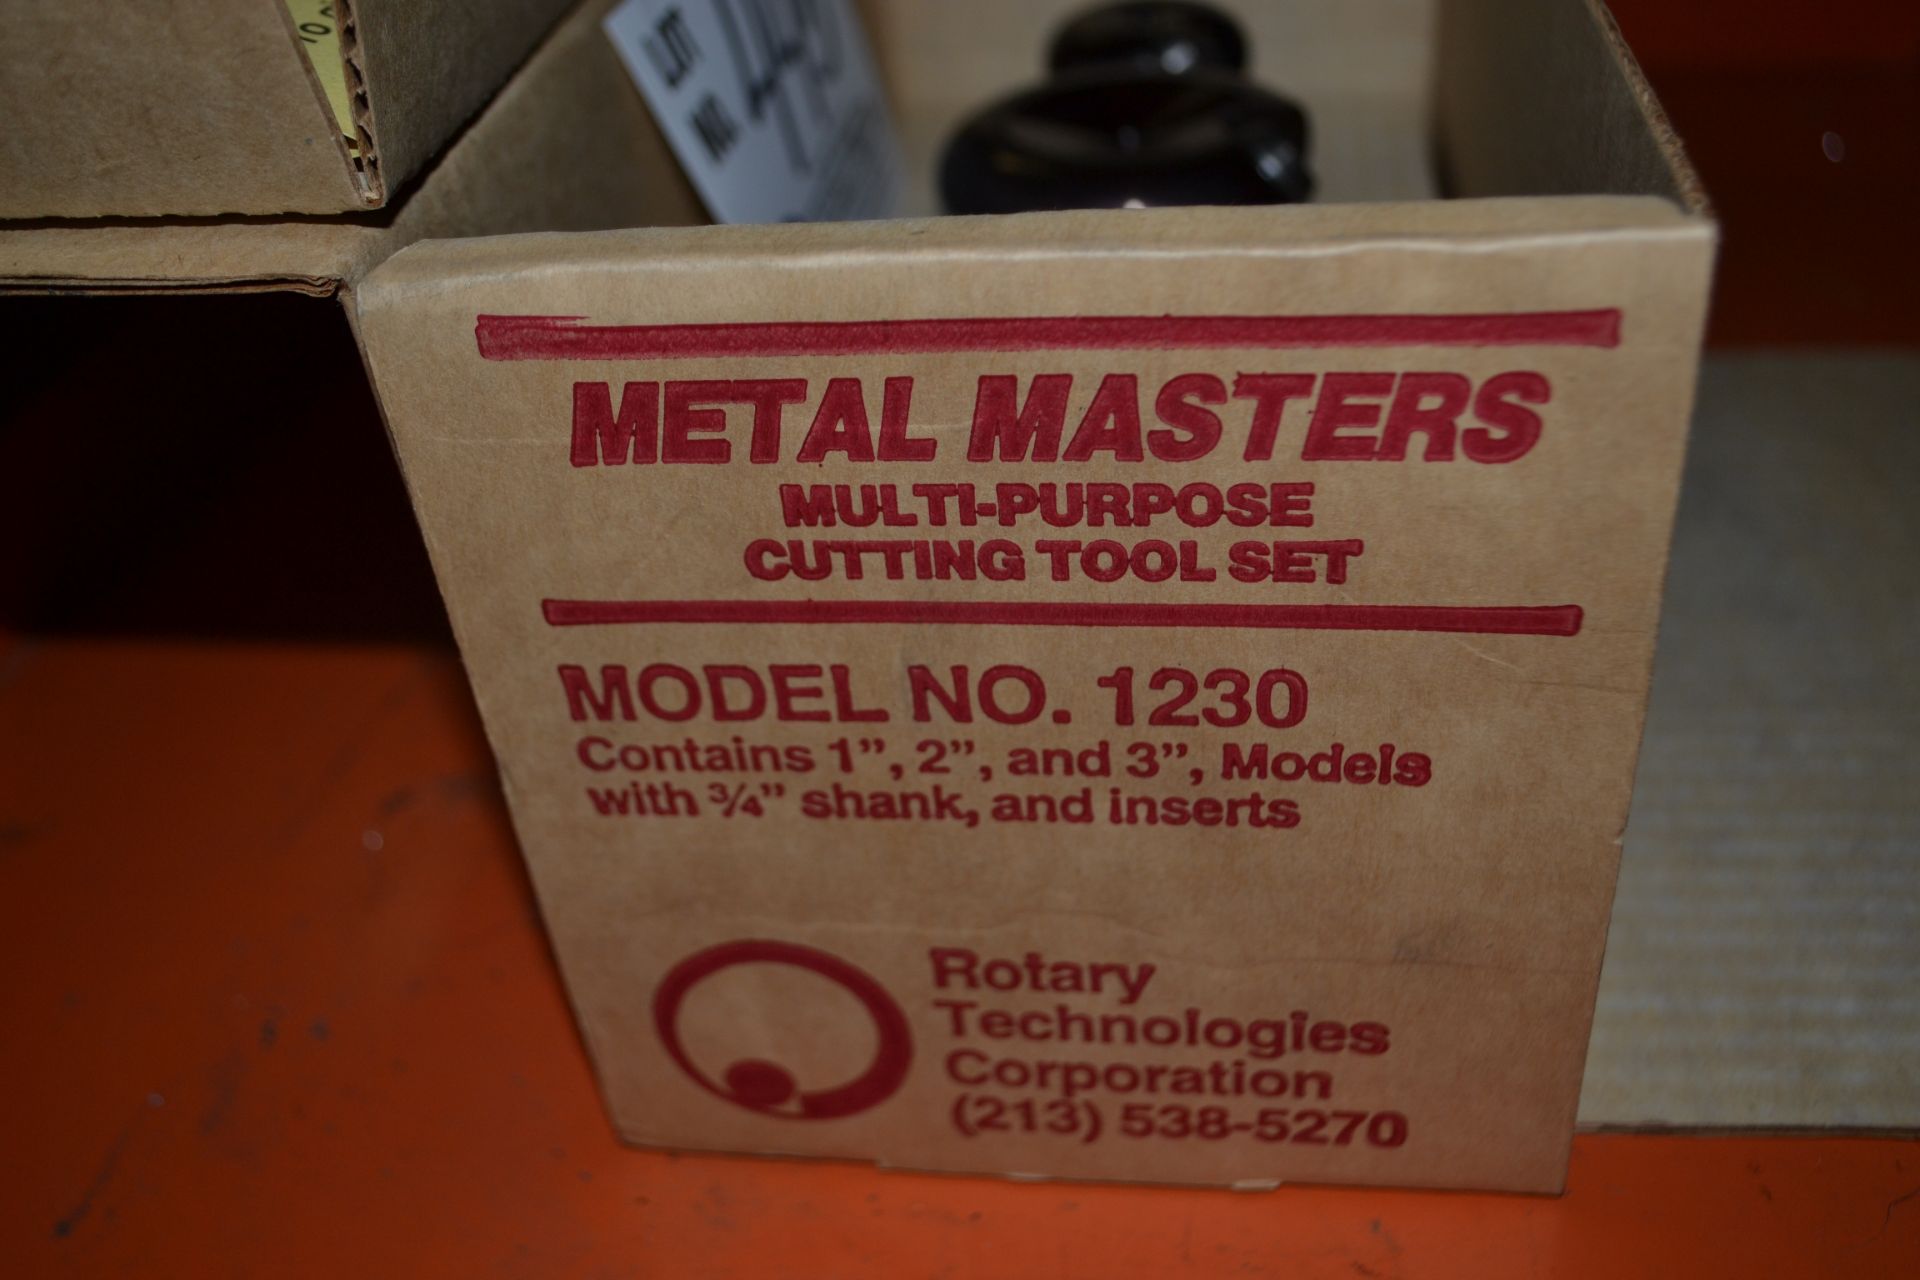 Rotary Technologies Corp. Metal Masters Model 1230 Cutting tool Set - Image 2 of 2